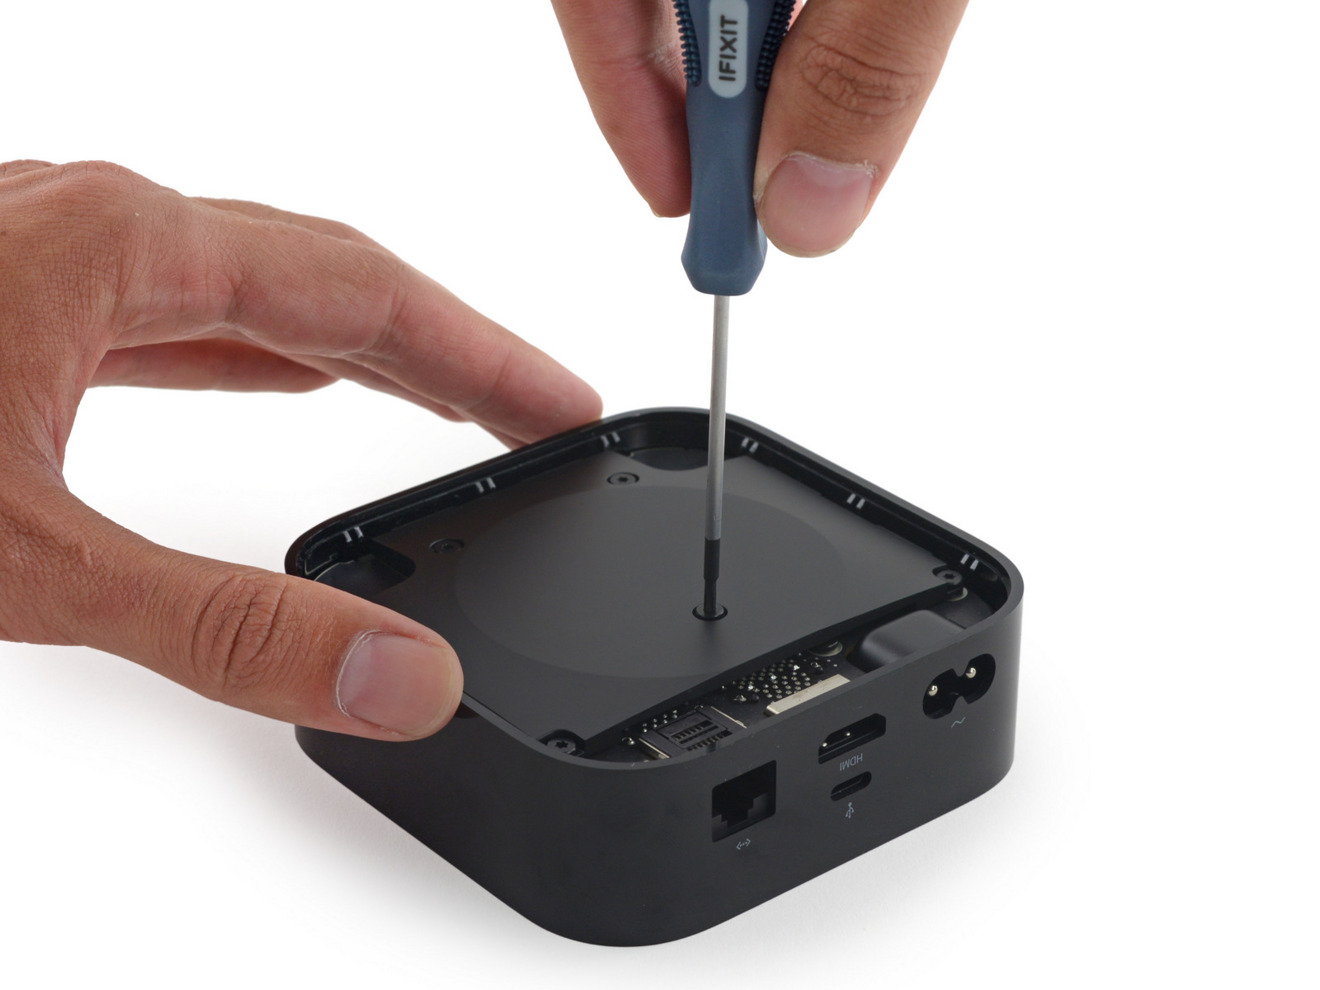 Fourth generation Apple TV disassembly by iFixit, showing similar screw position